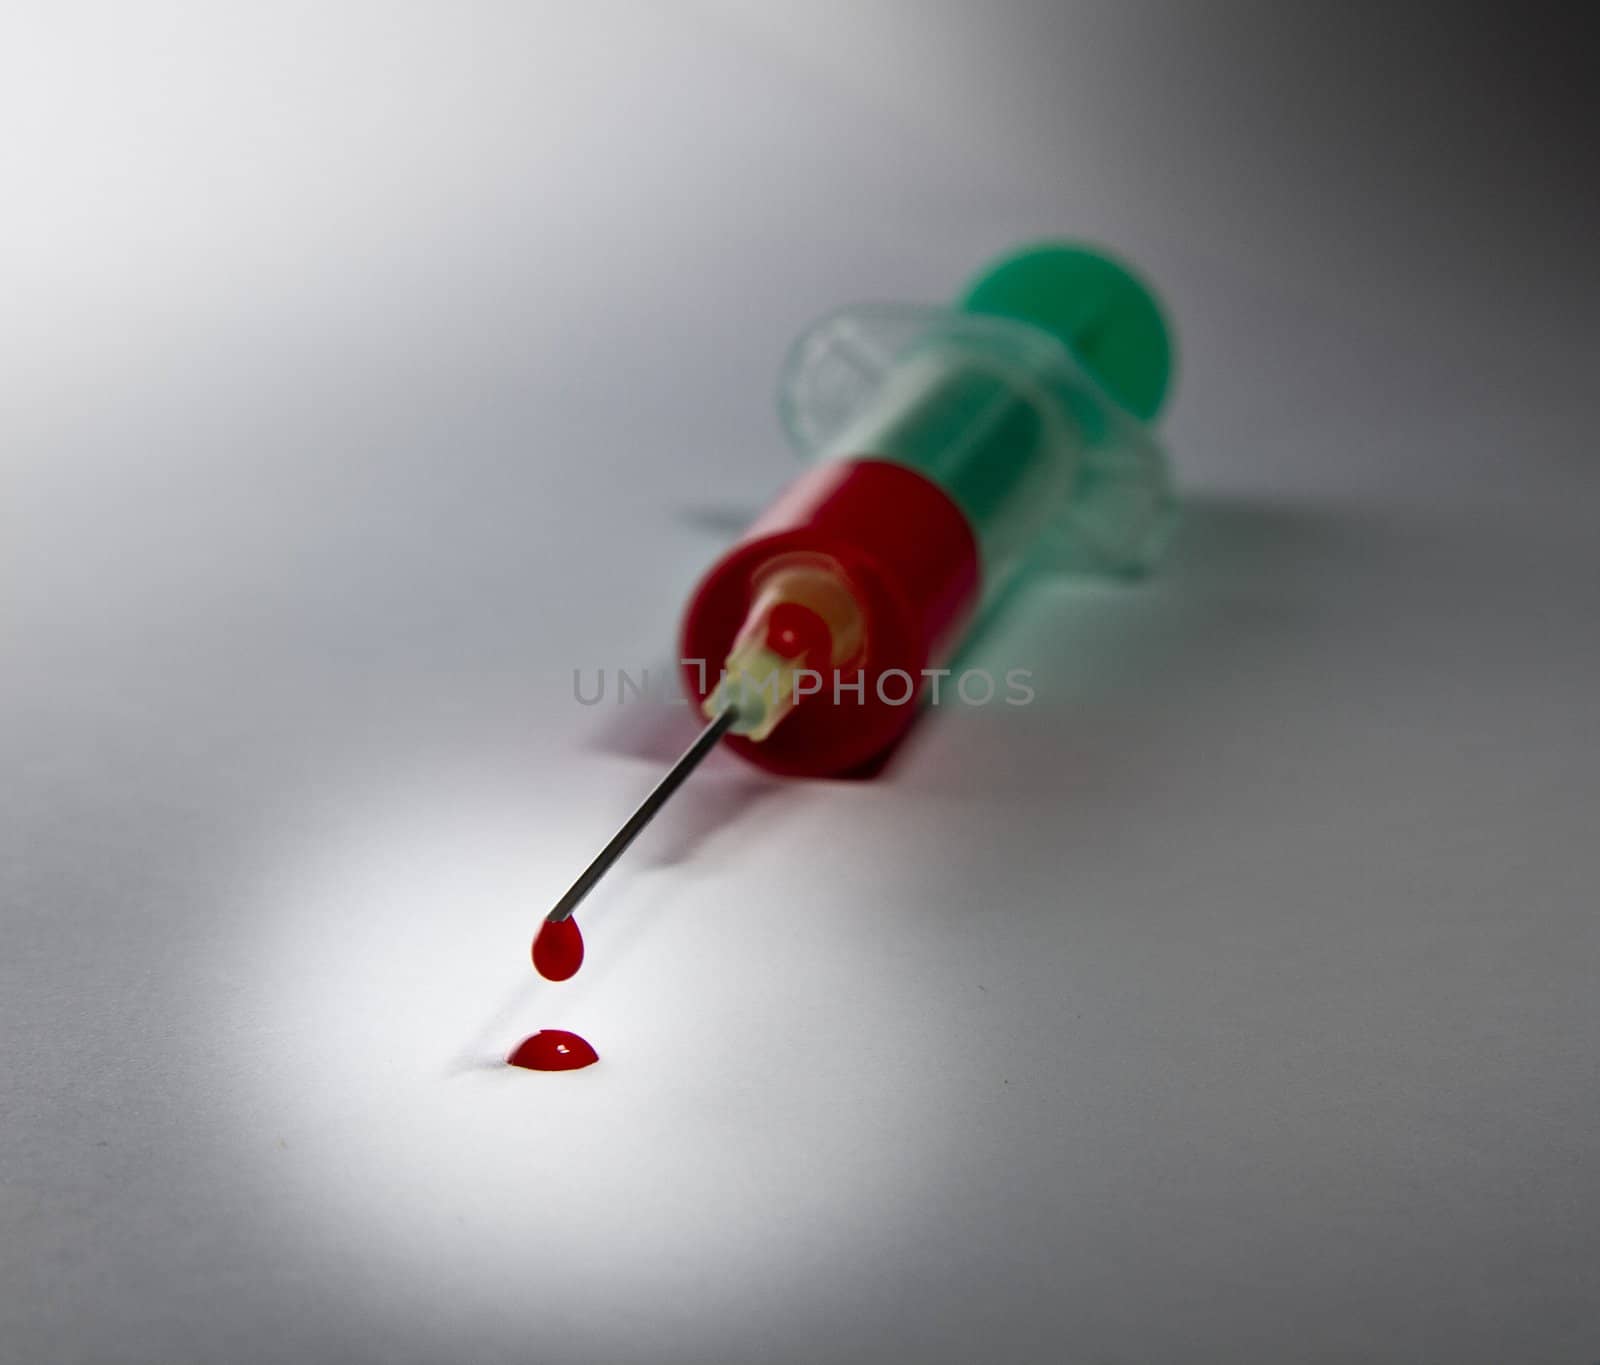 syringe laying on table filled with blood by gewoldi